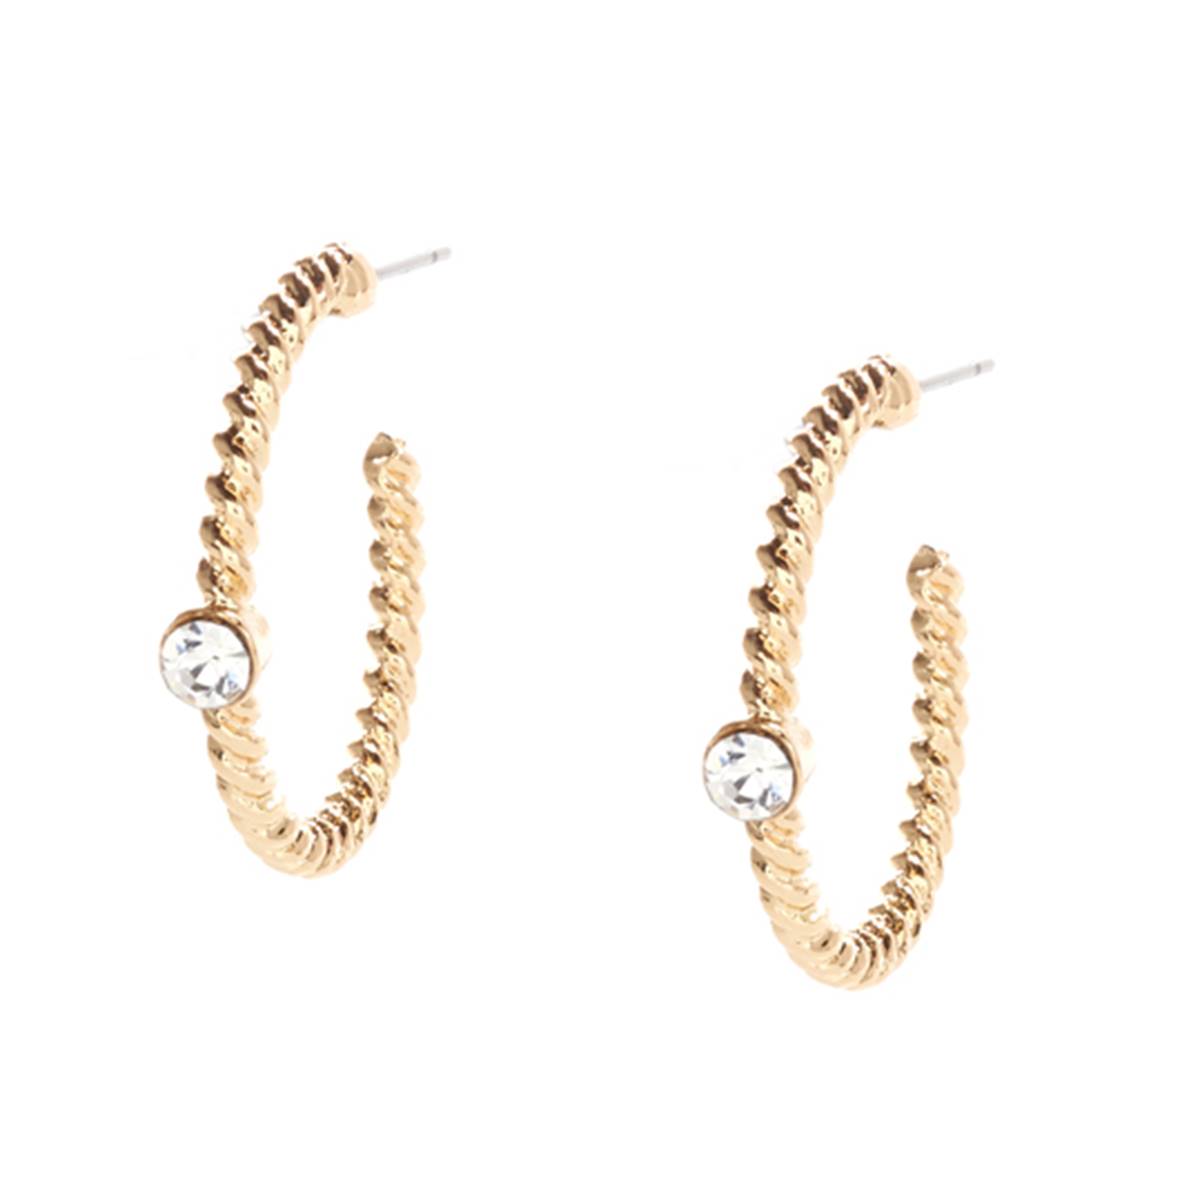 Ashley Cooper(tm) Twisted Hoop Earrings W/ Glass Crystal Accents